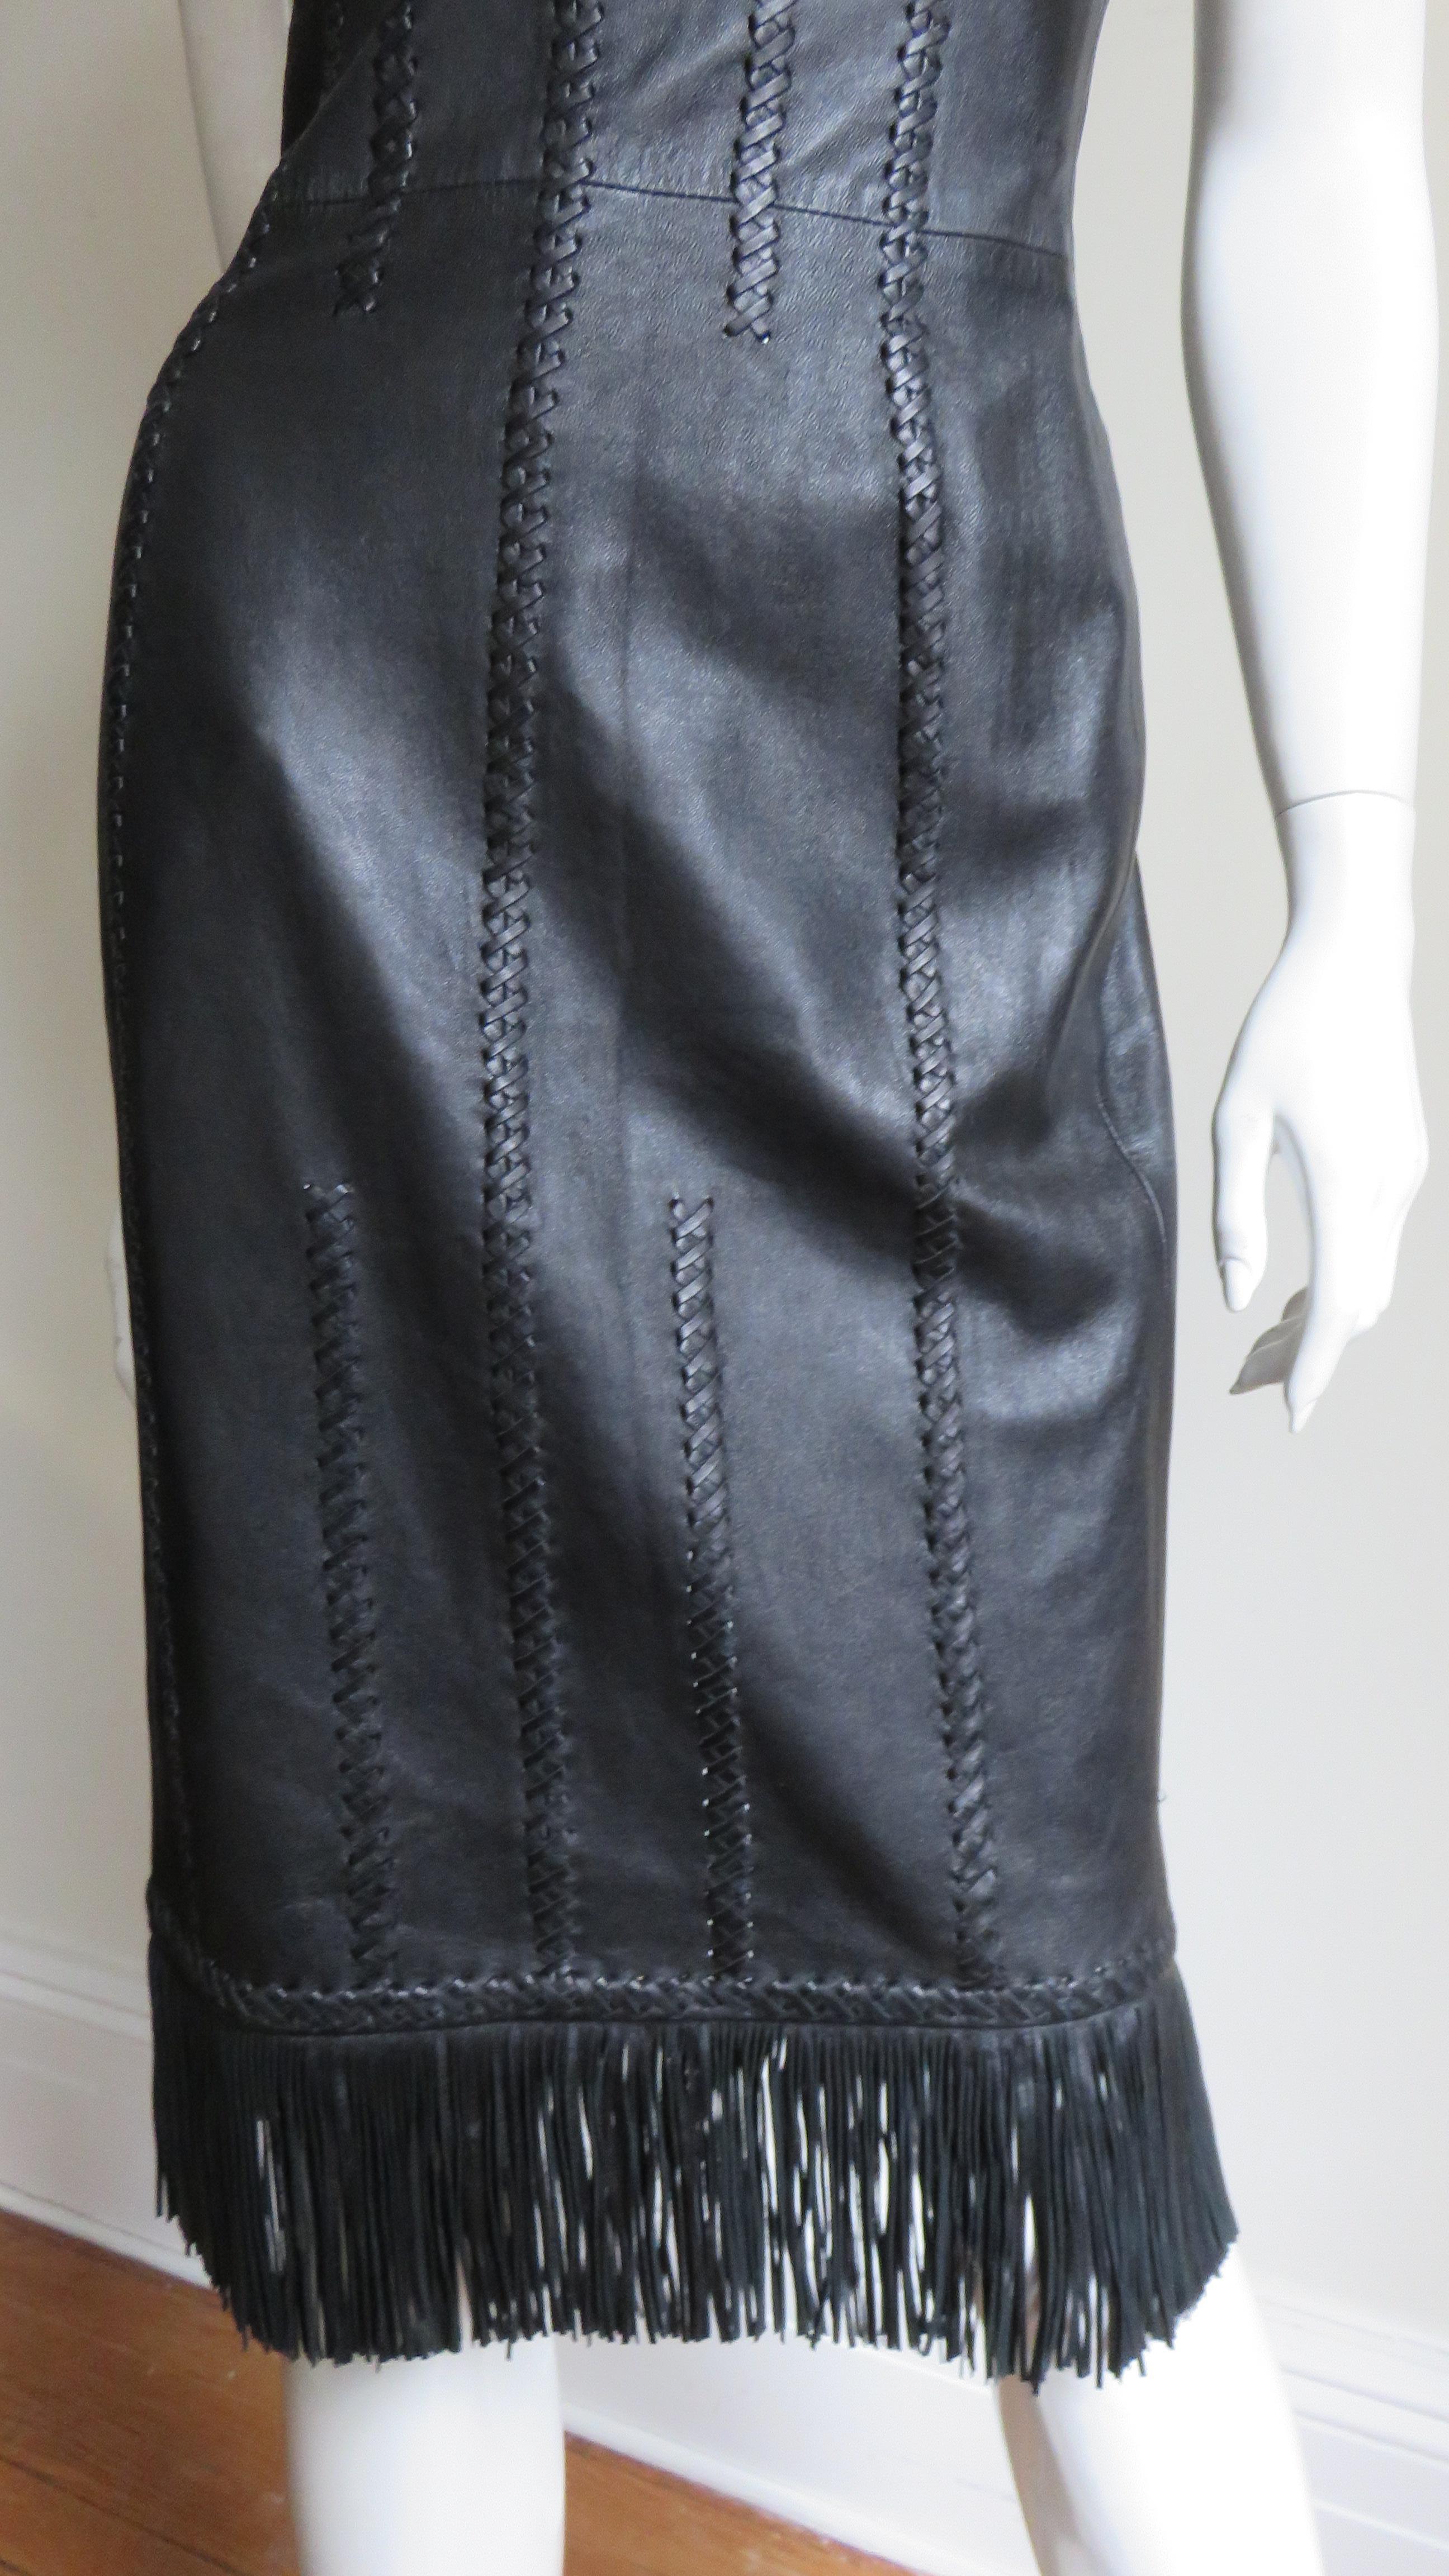  Gianni Versace Leather Lace up Dress S/S 2002 For Sale 2